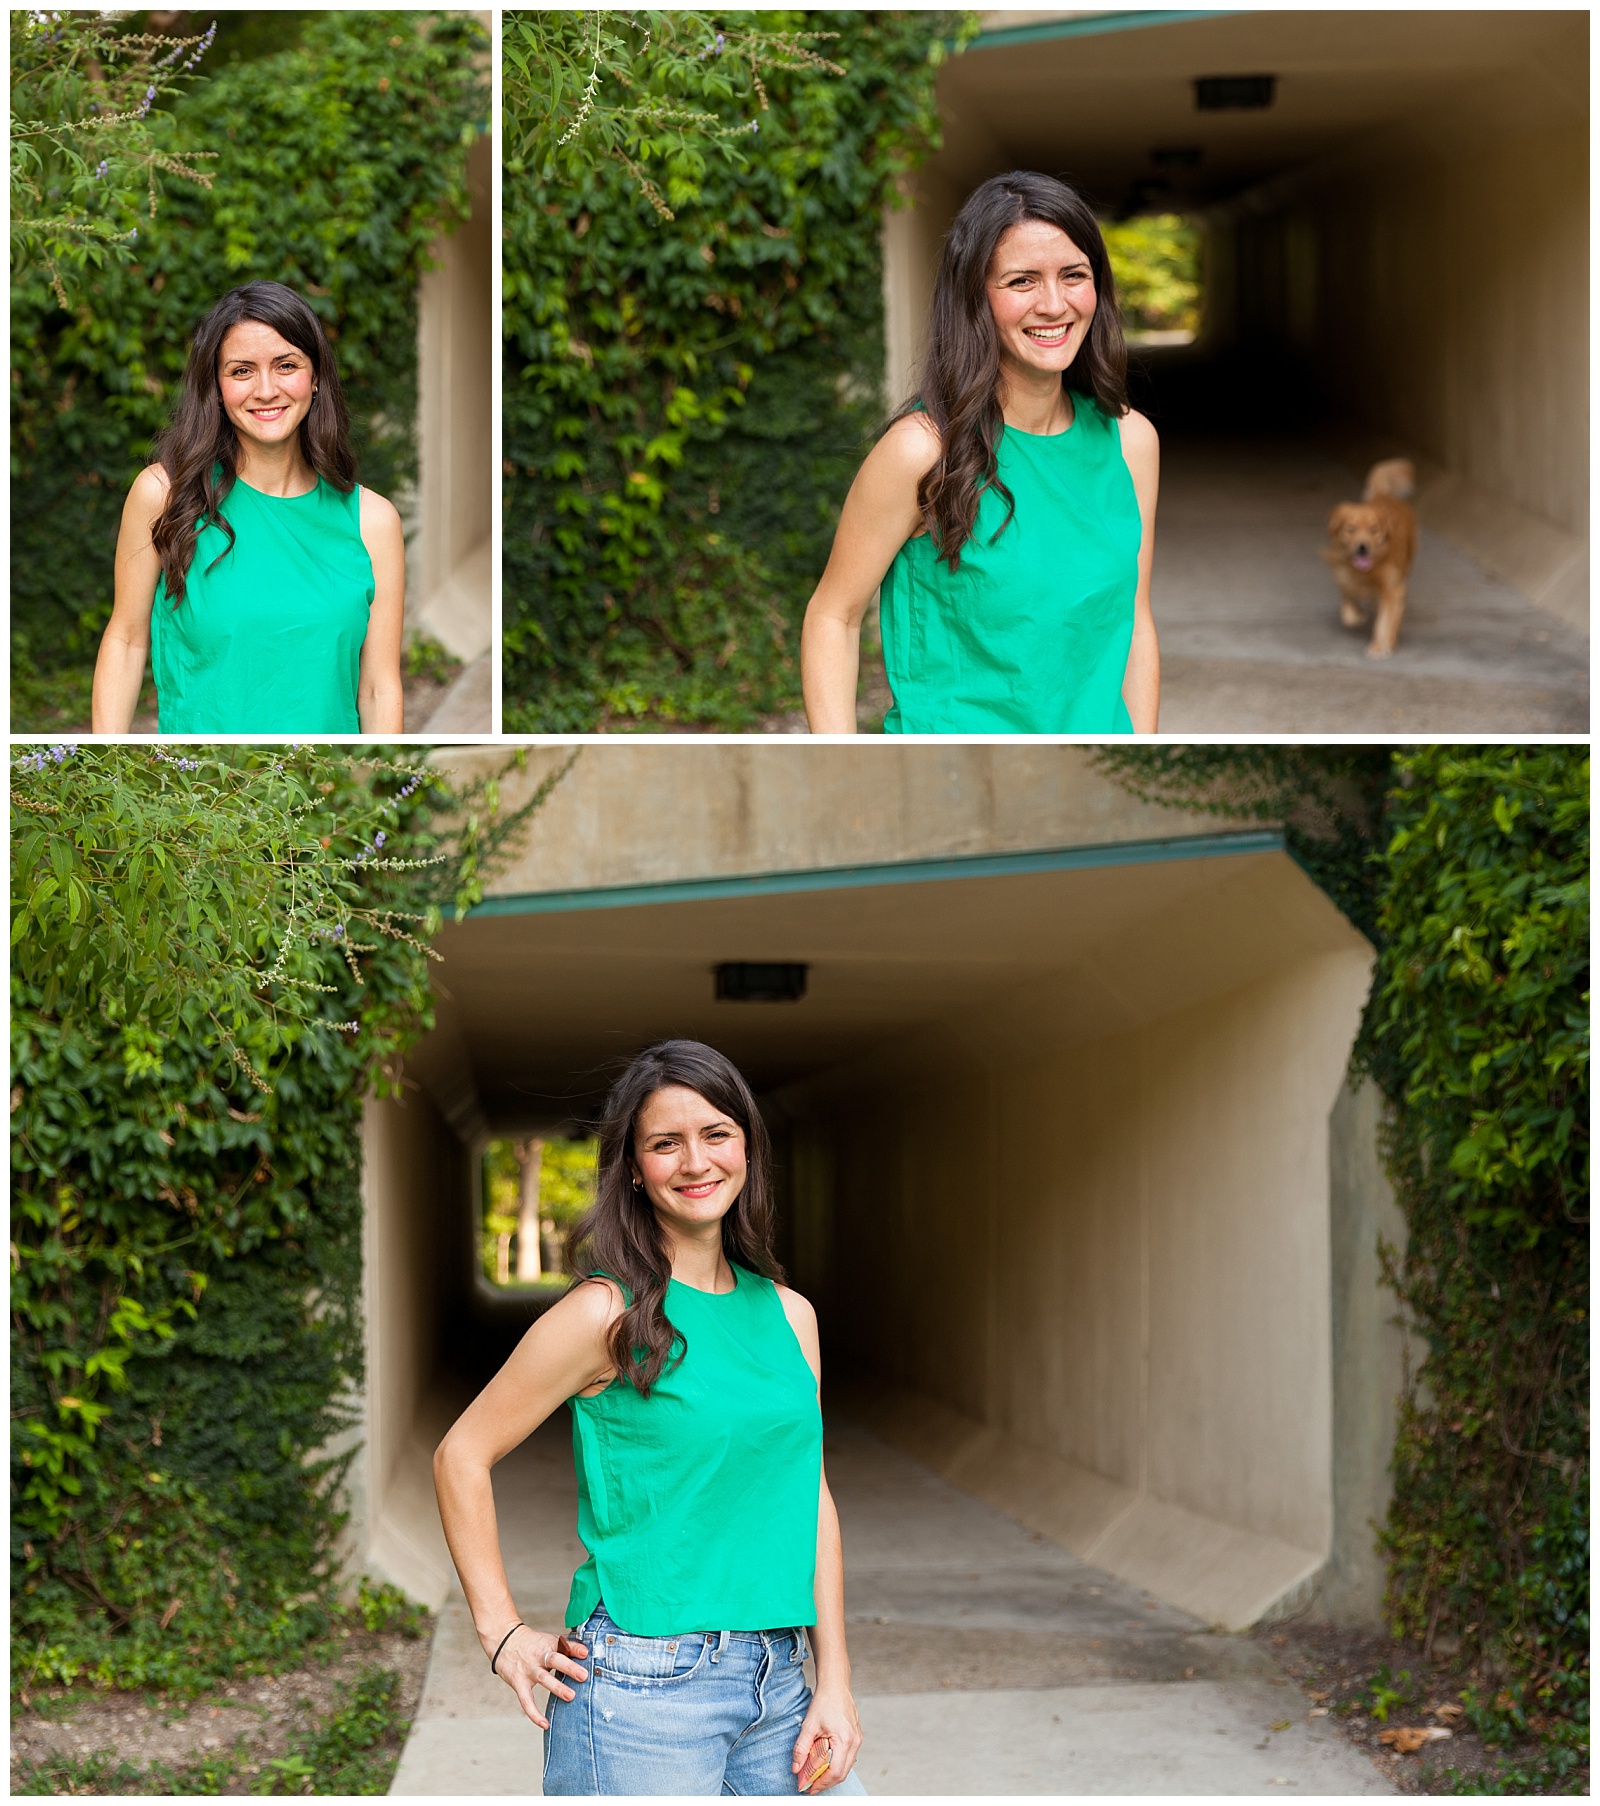 Casual photoshoot at Lakeside Park in Dallas Texas by Alyssa Grace Photography